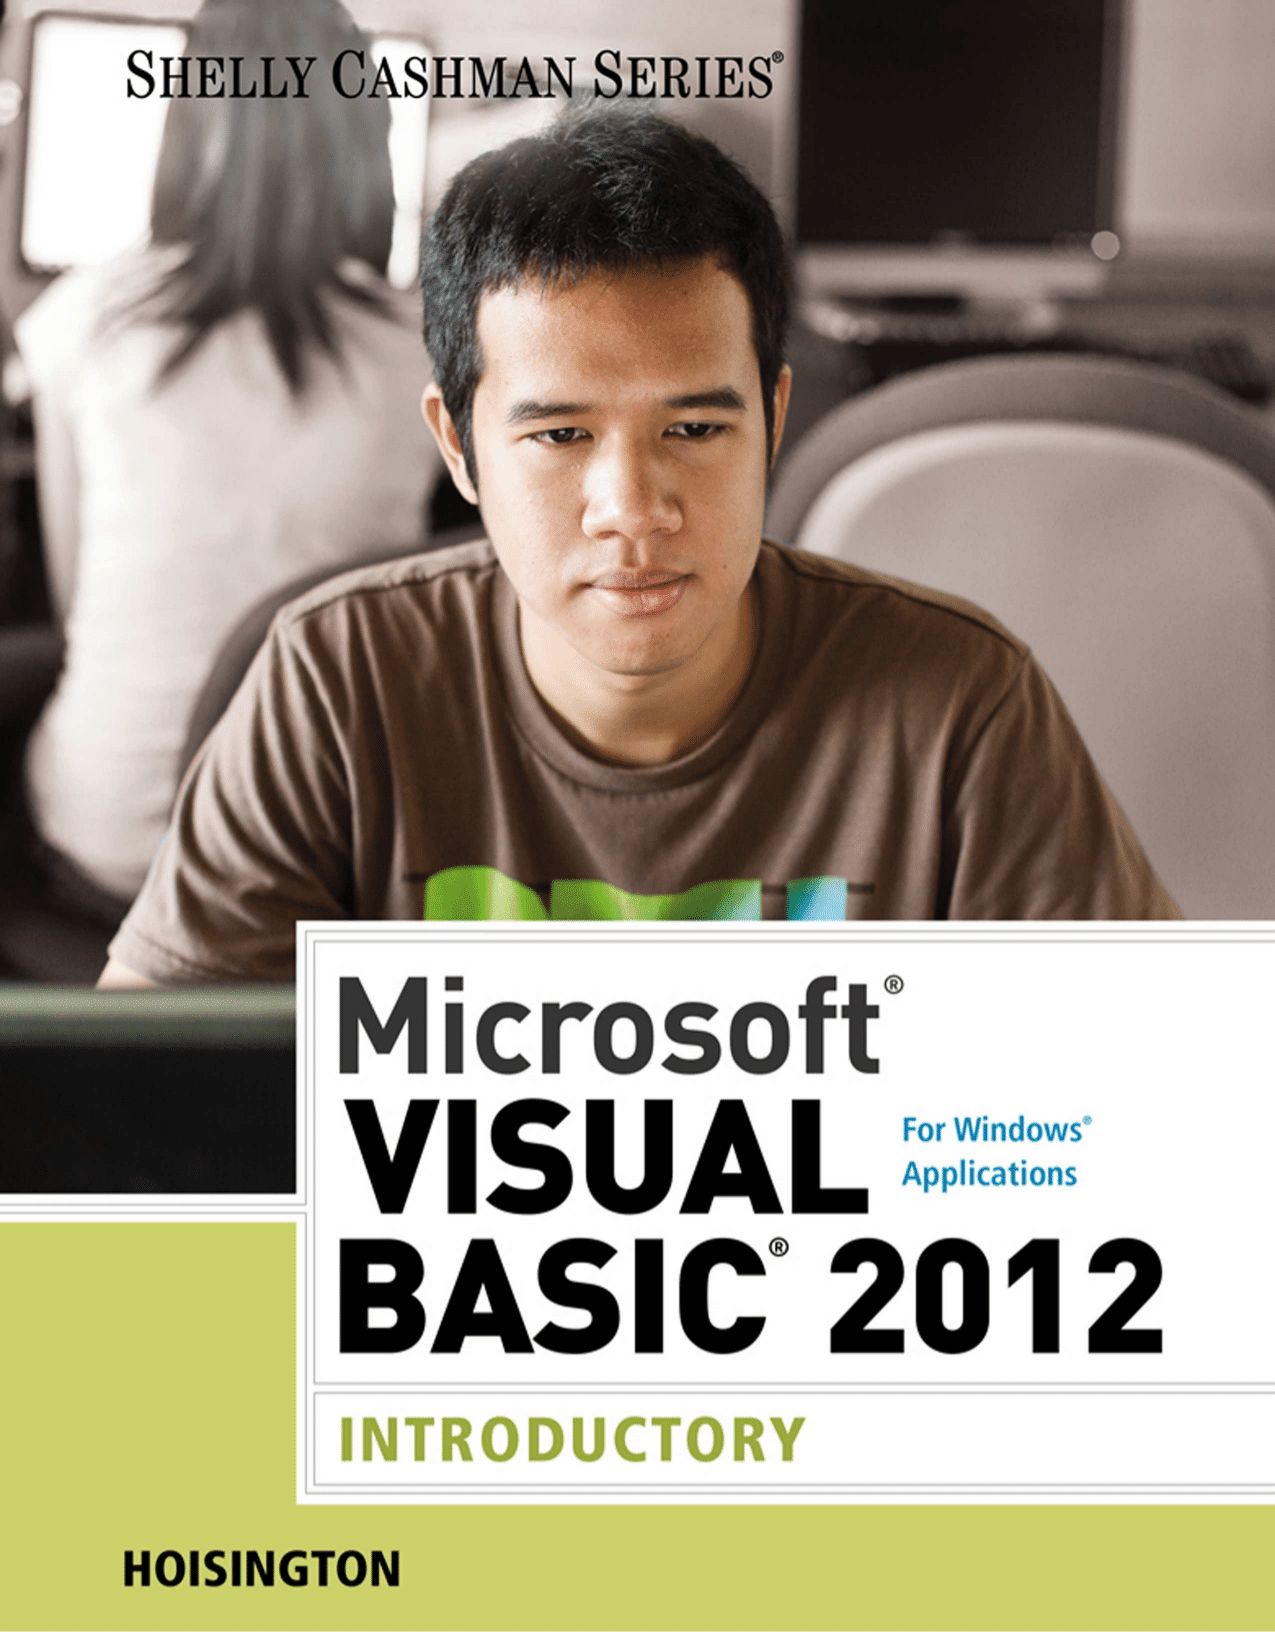 Microsoft Visual Basic 2012 for Windows Applications: Introductory